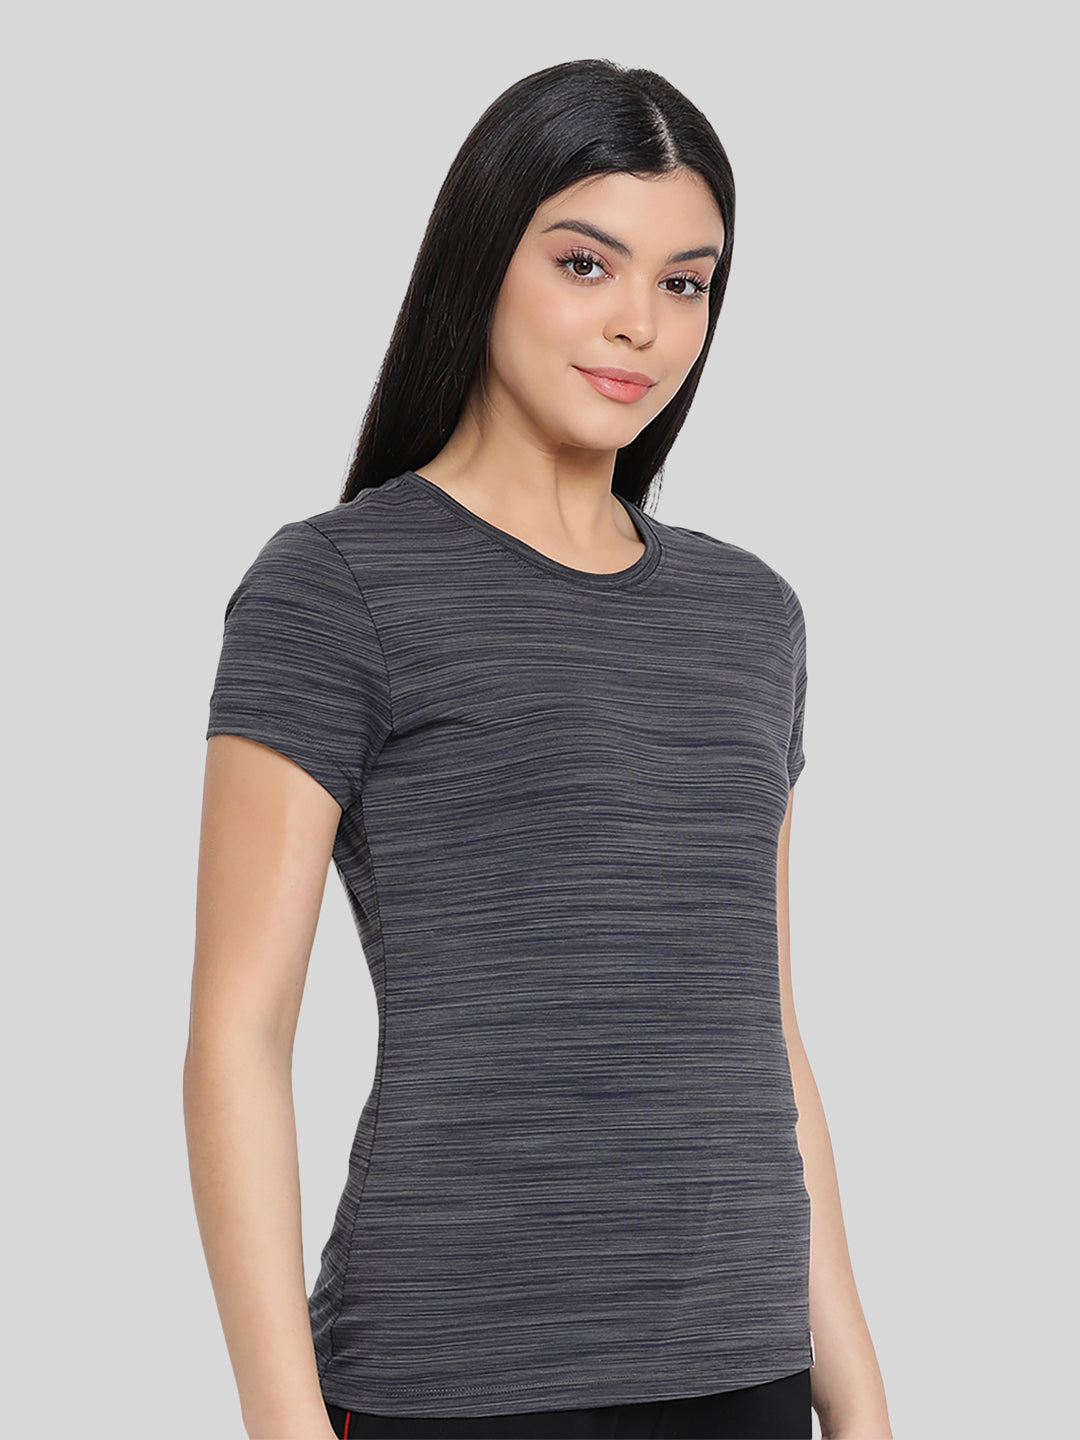 Black Round Neck Space Dyeing T-Shirt #413